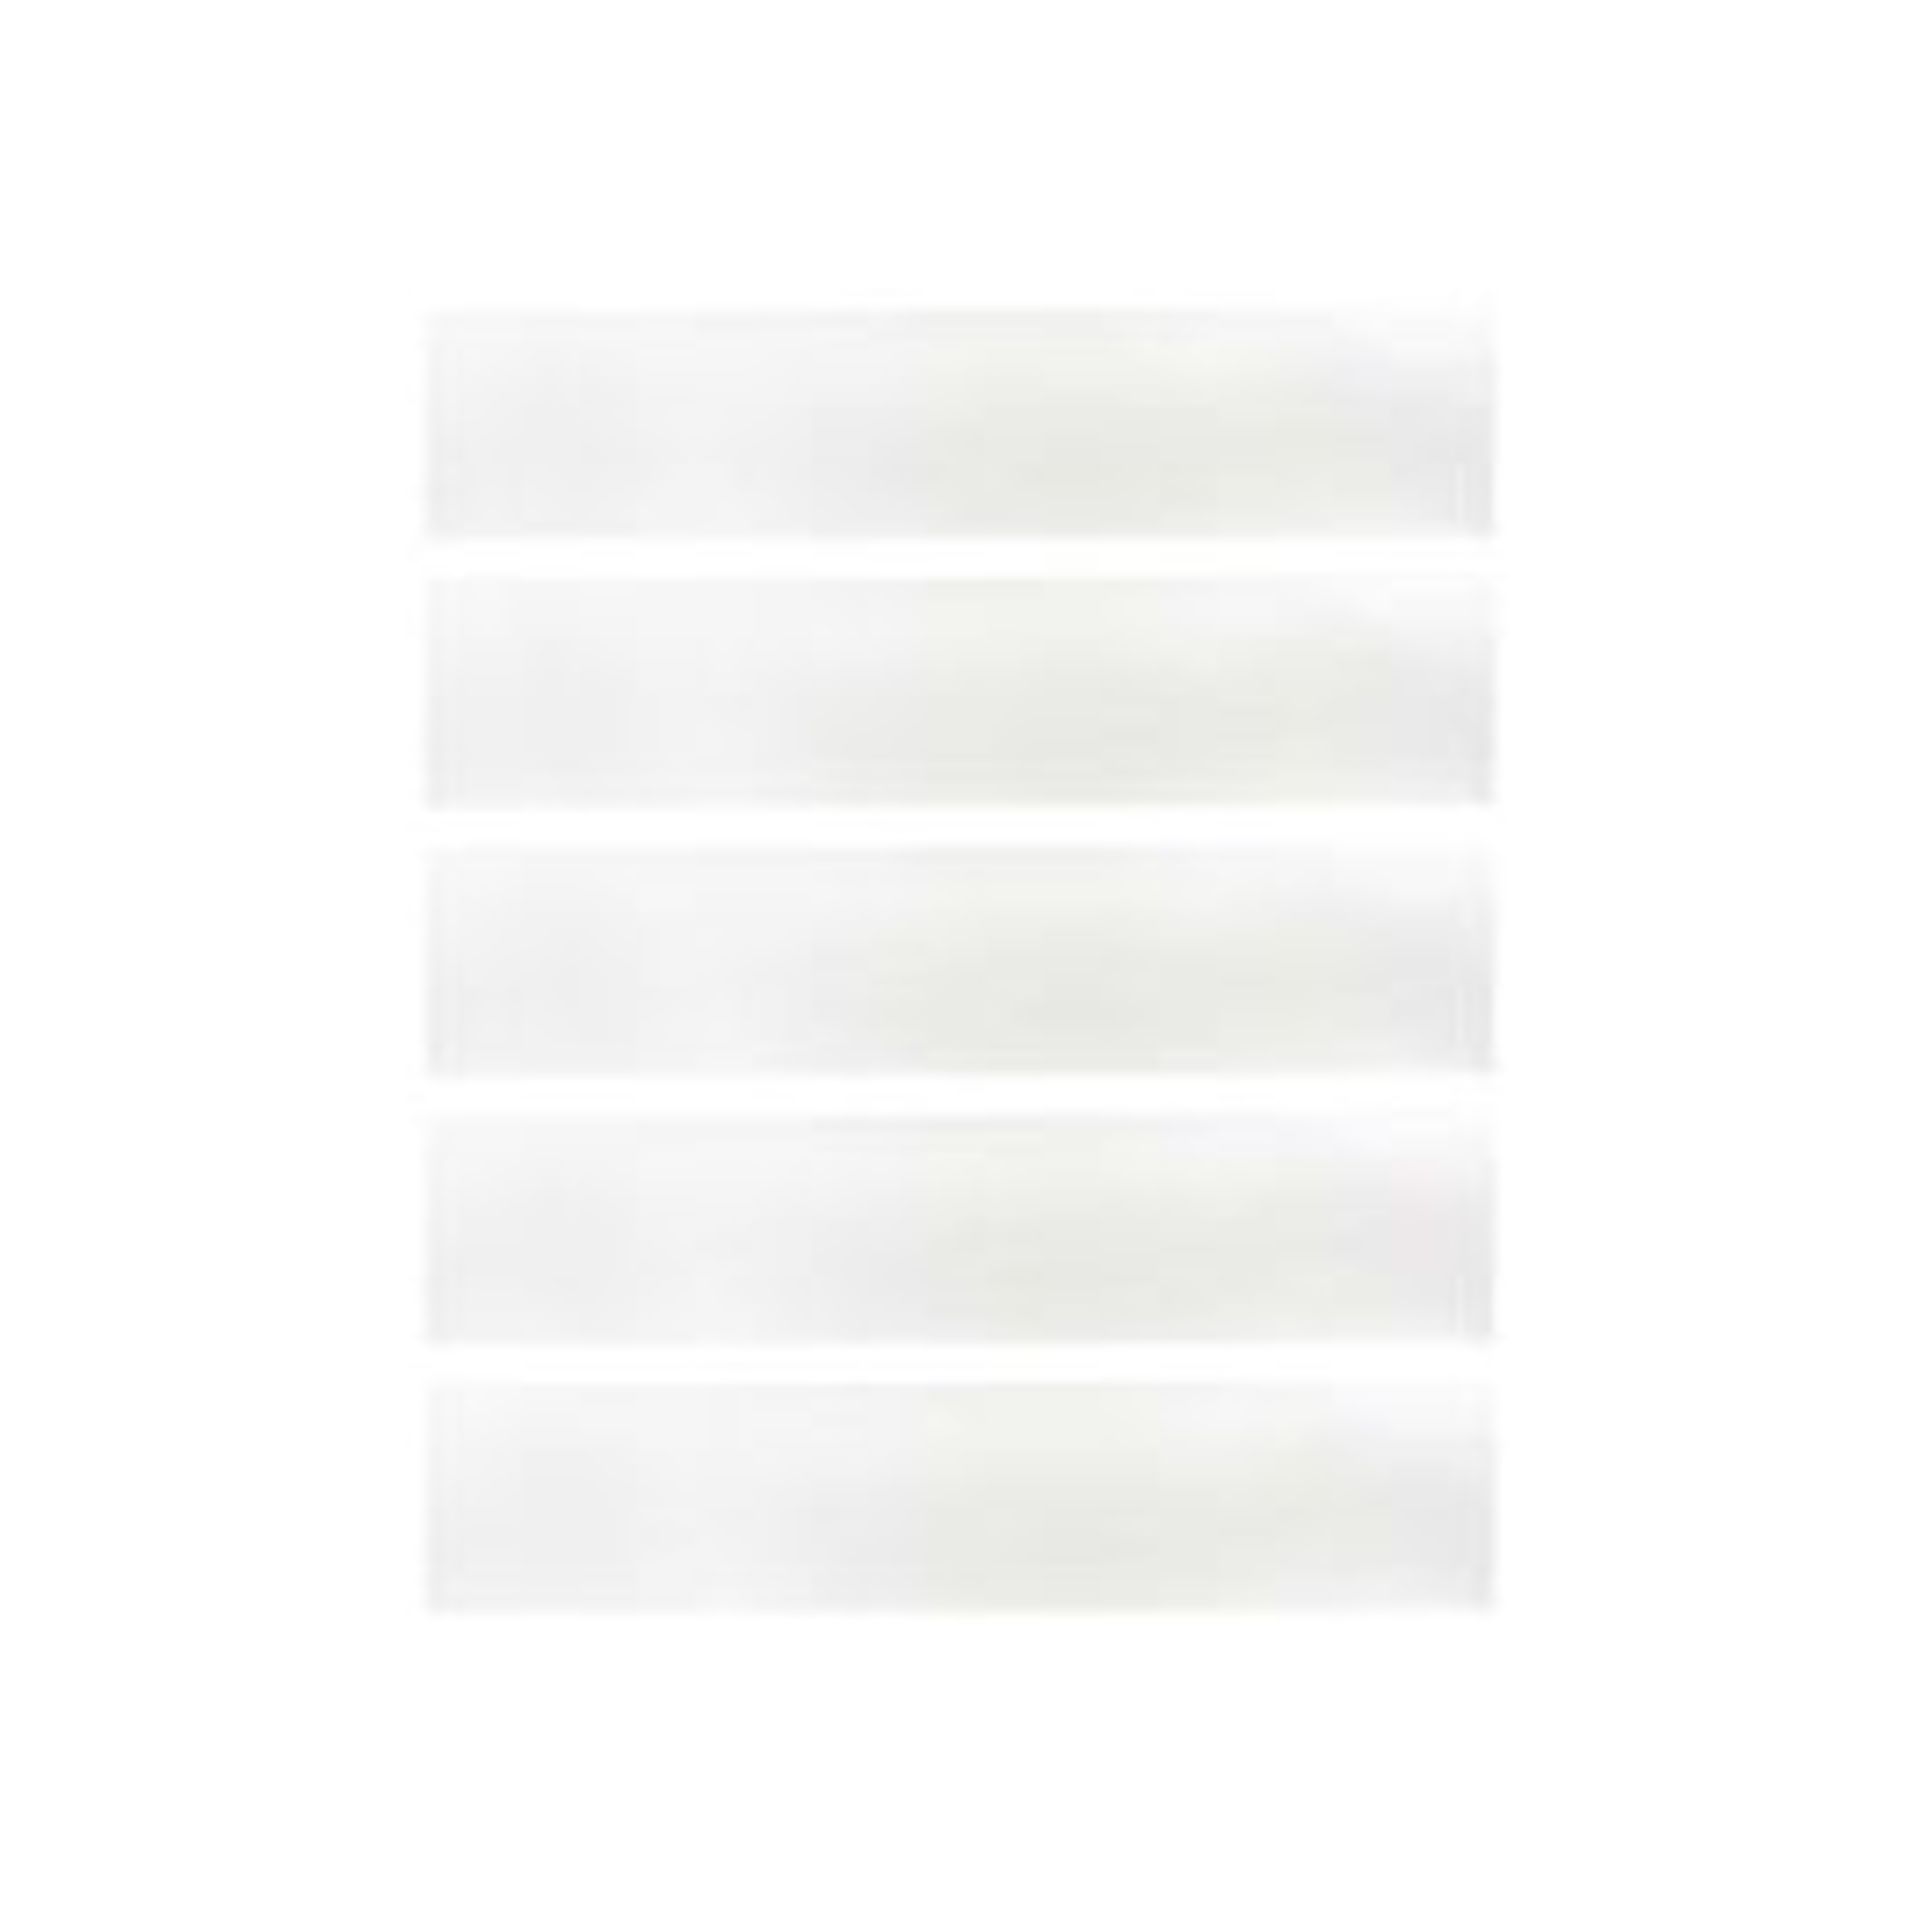 Heals Tower Pair of Small Shelves White RRP 85 Tower Shelf Set of 5 Shelves White - Tower Shelf